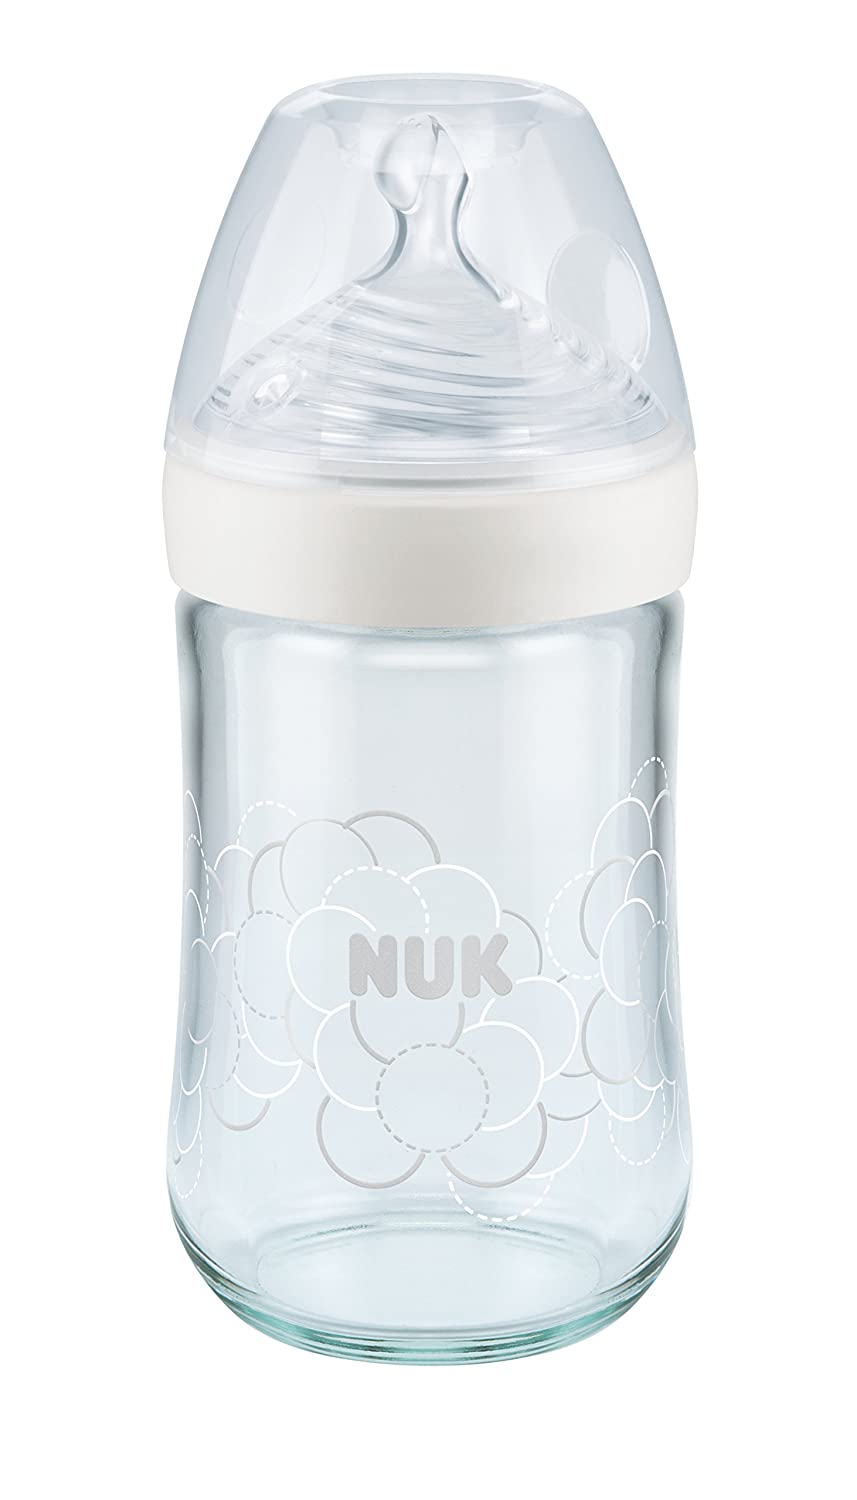 NUK Nature Sense Glass Baby Bottle 0-6 Months Breast-Like Silicone Teat, 240 ml, White